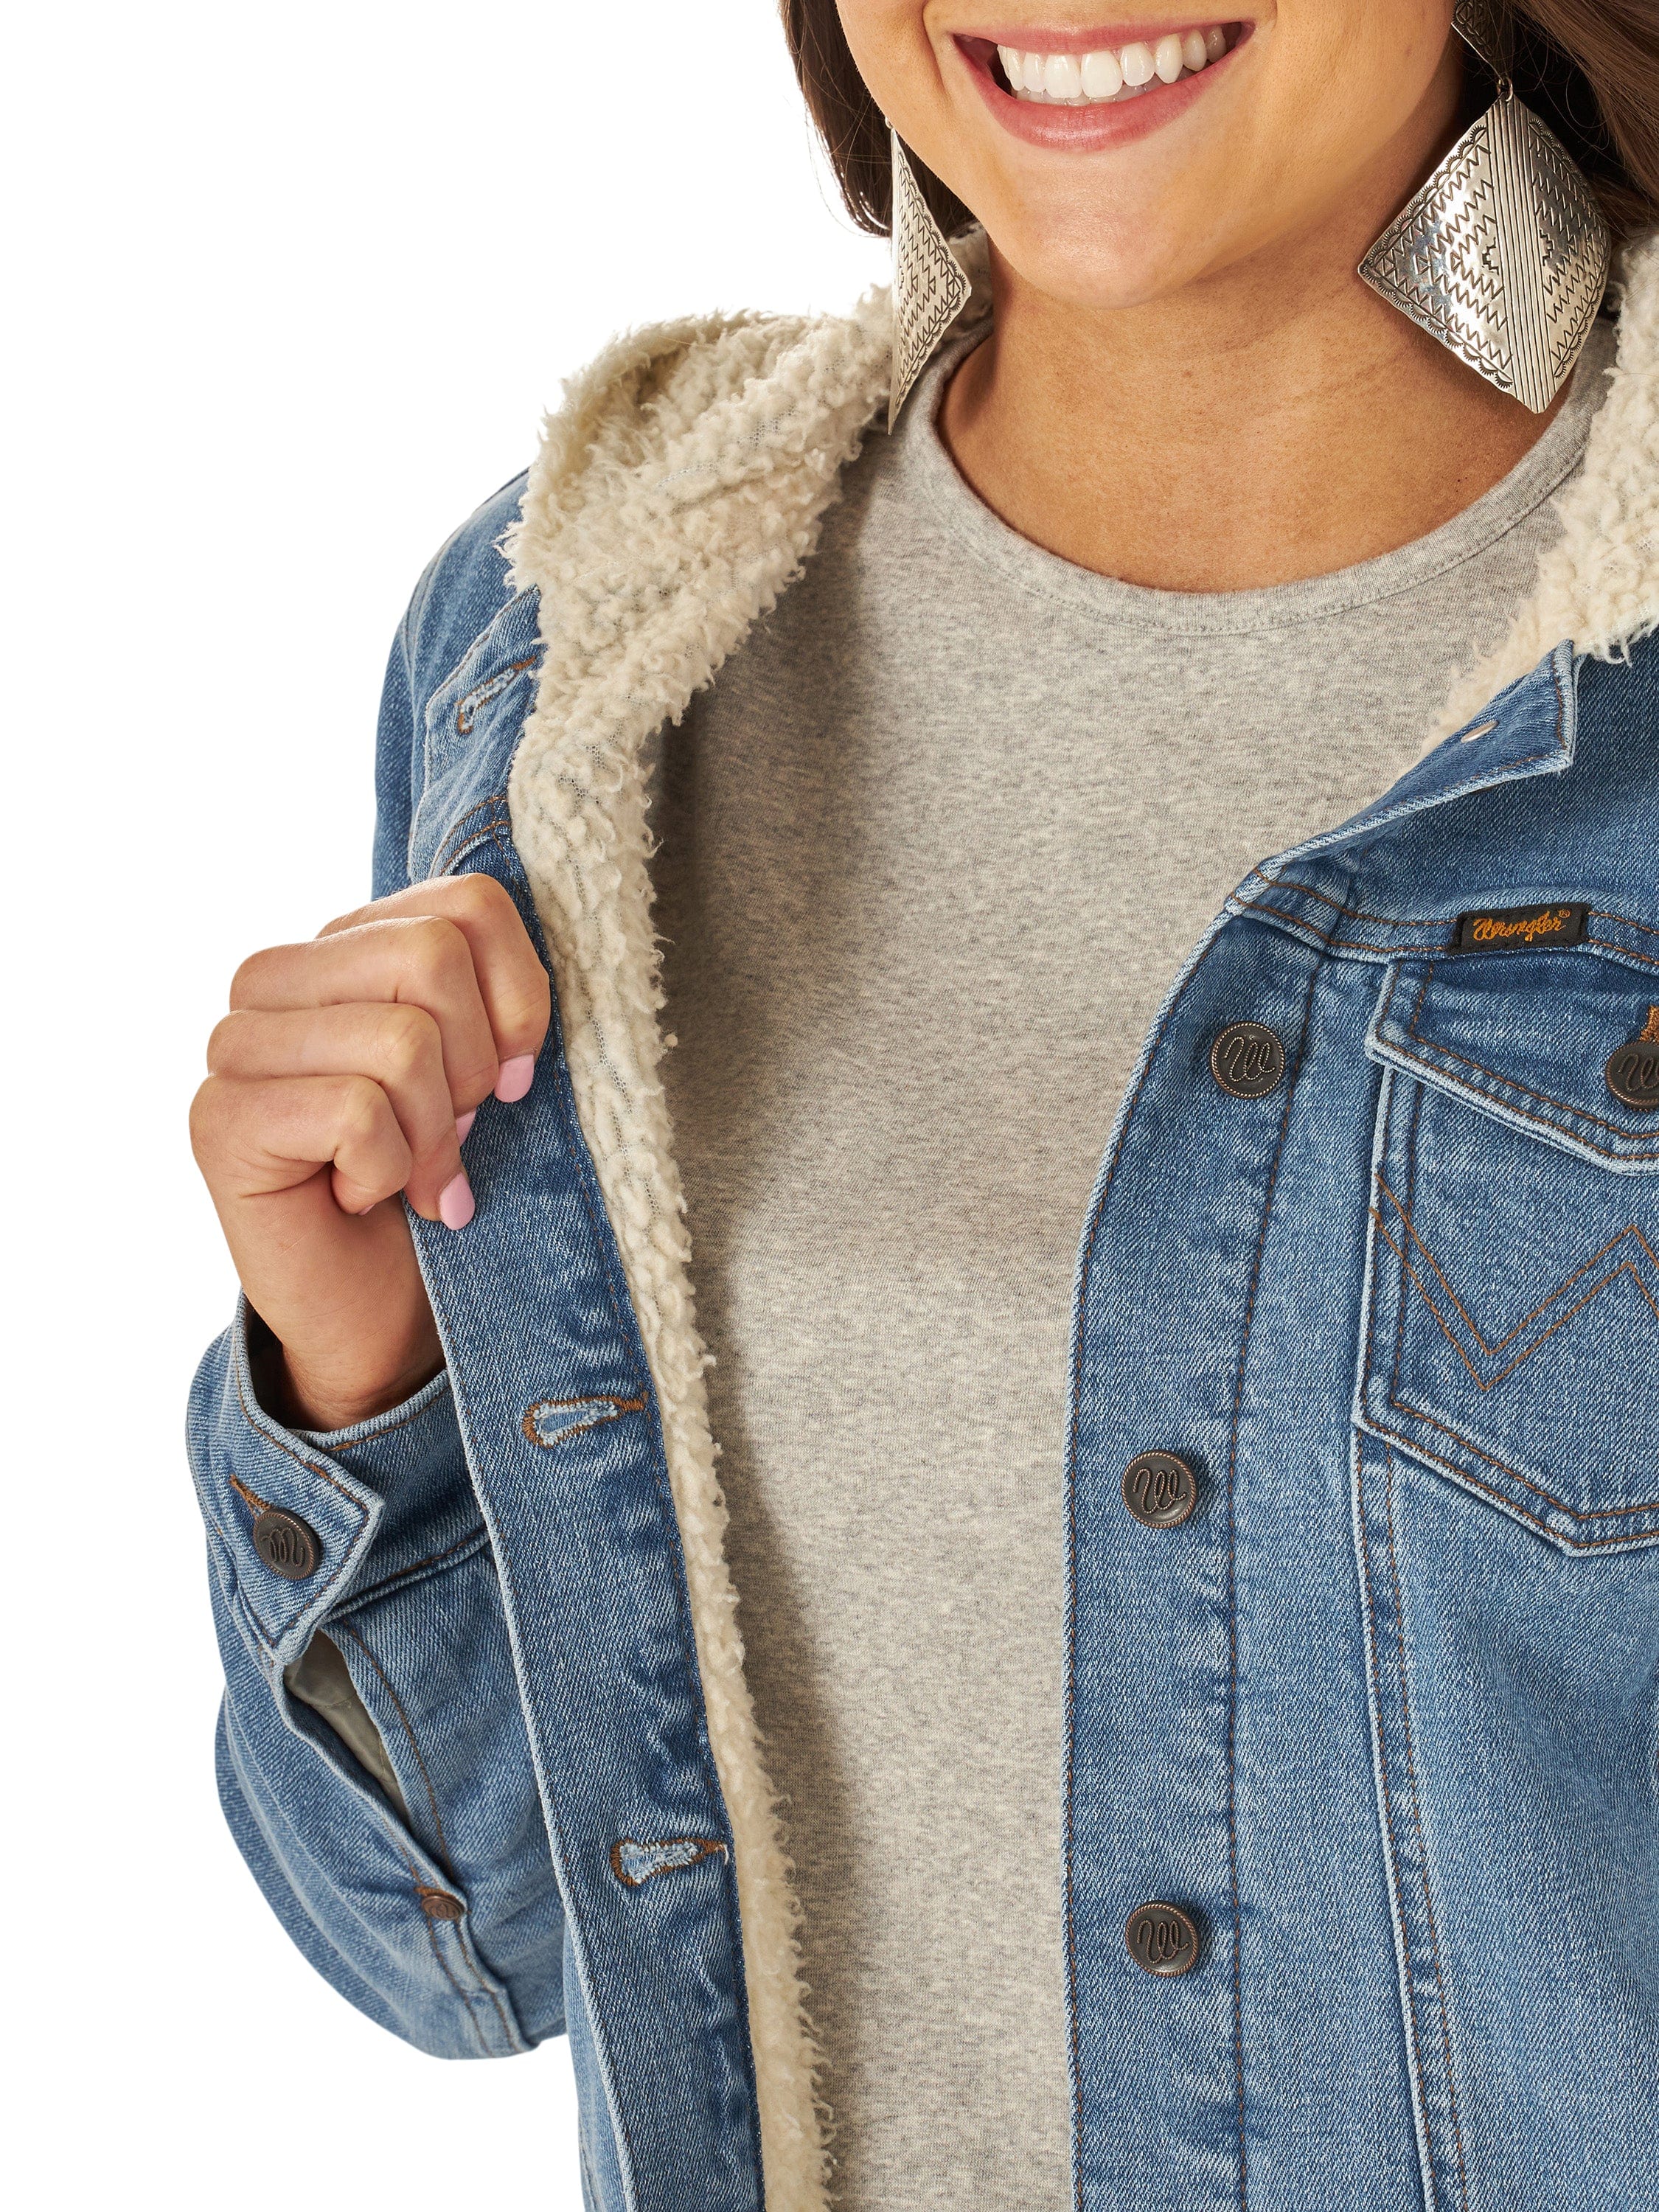 Denim + Shearling  Denim jacket outfit, Jacket outfits, Outfits